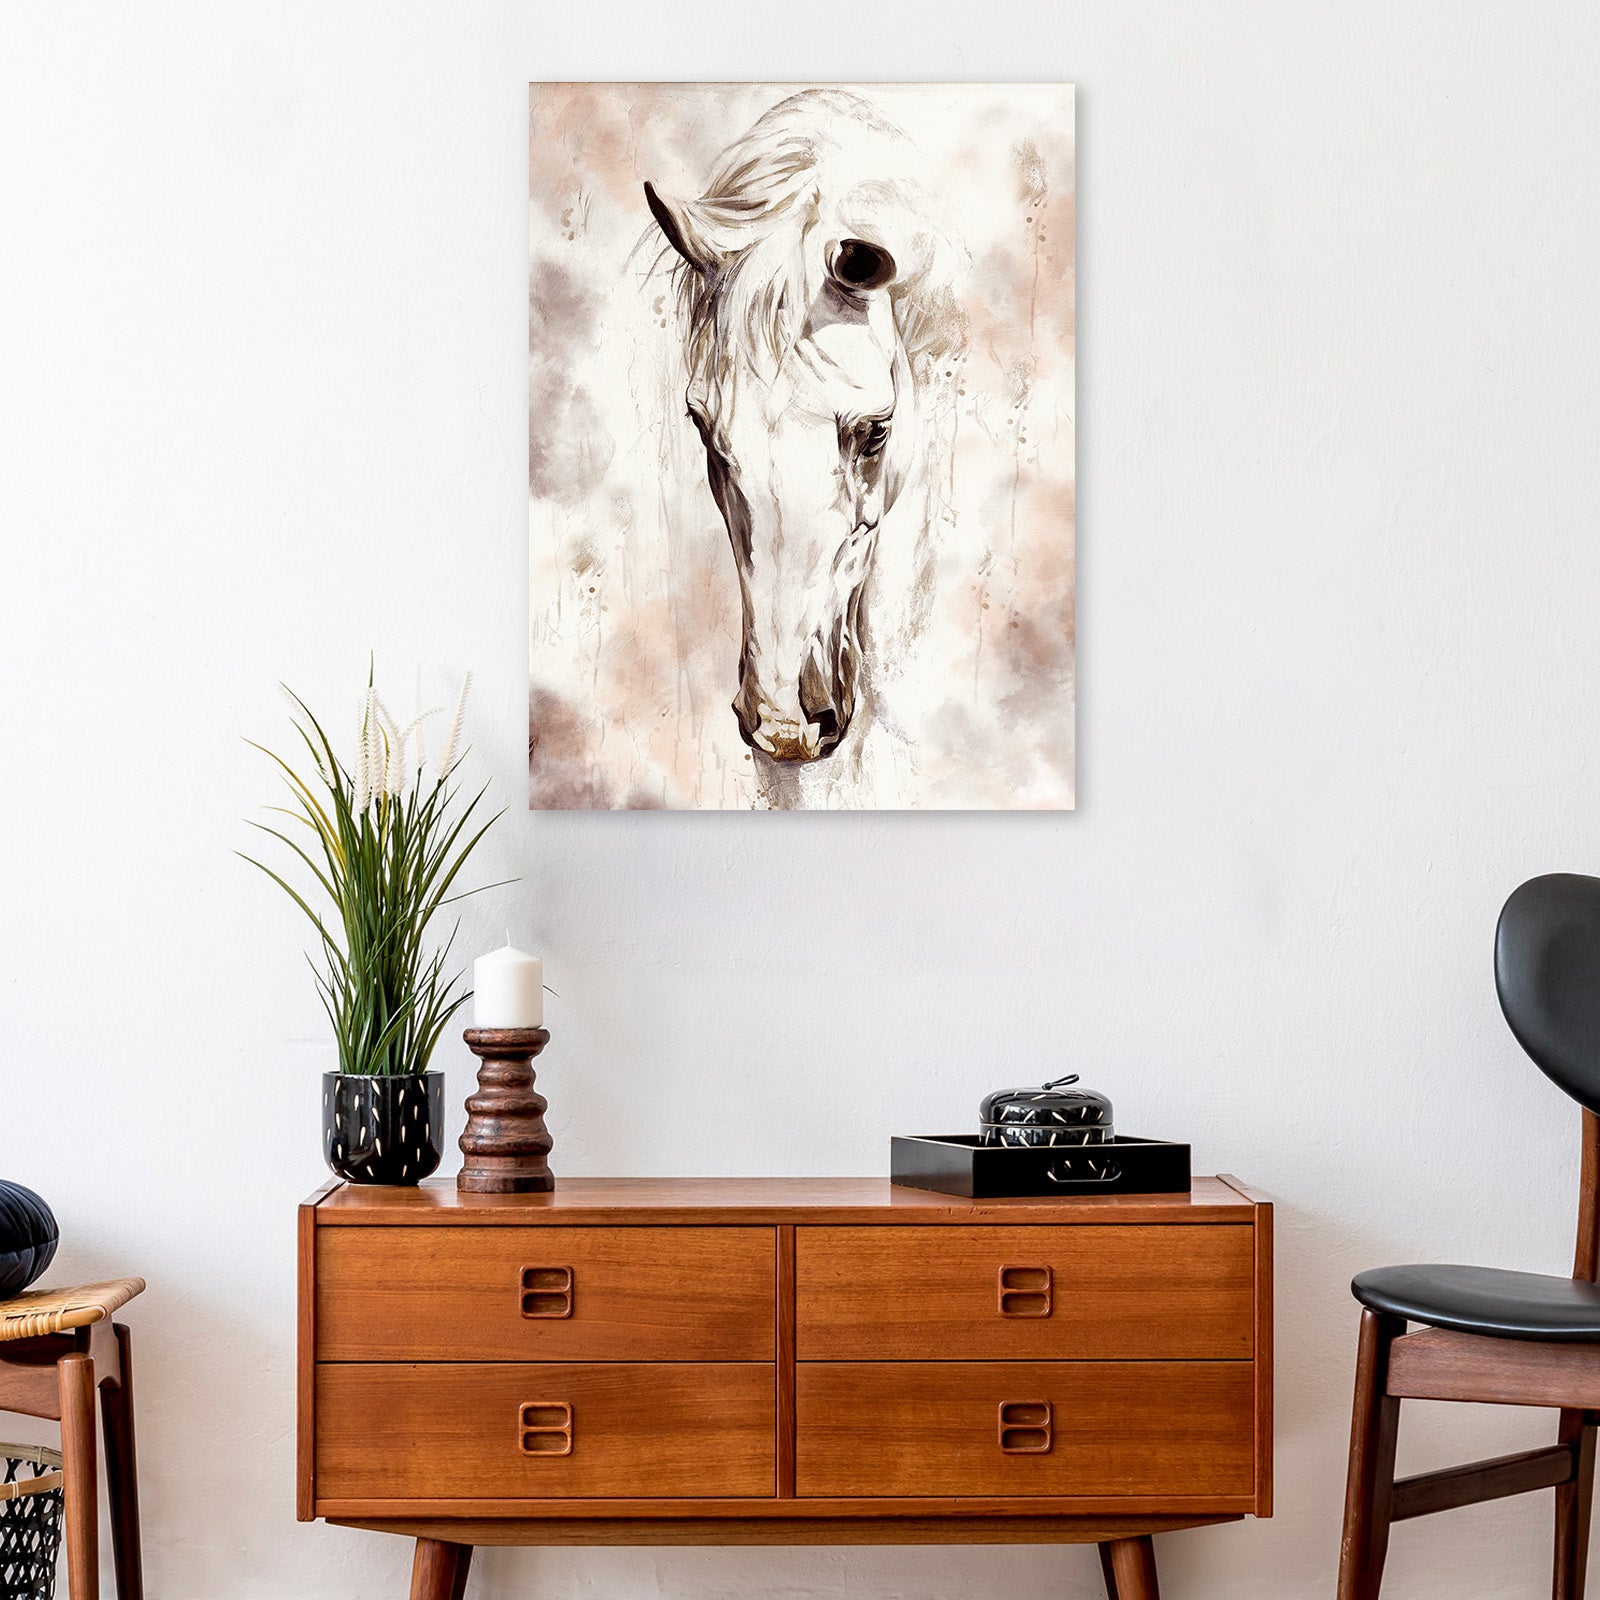 Sorrowful Horse Canvas Wall Art Style 1 - Image by Tailored Canvases